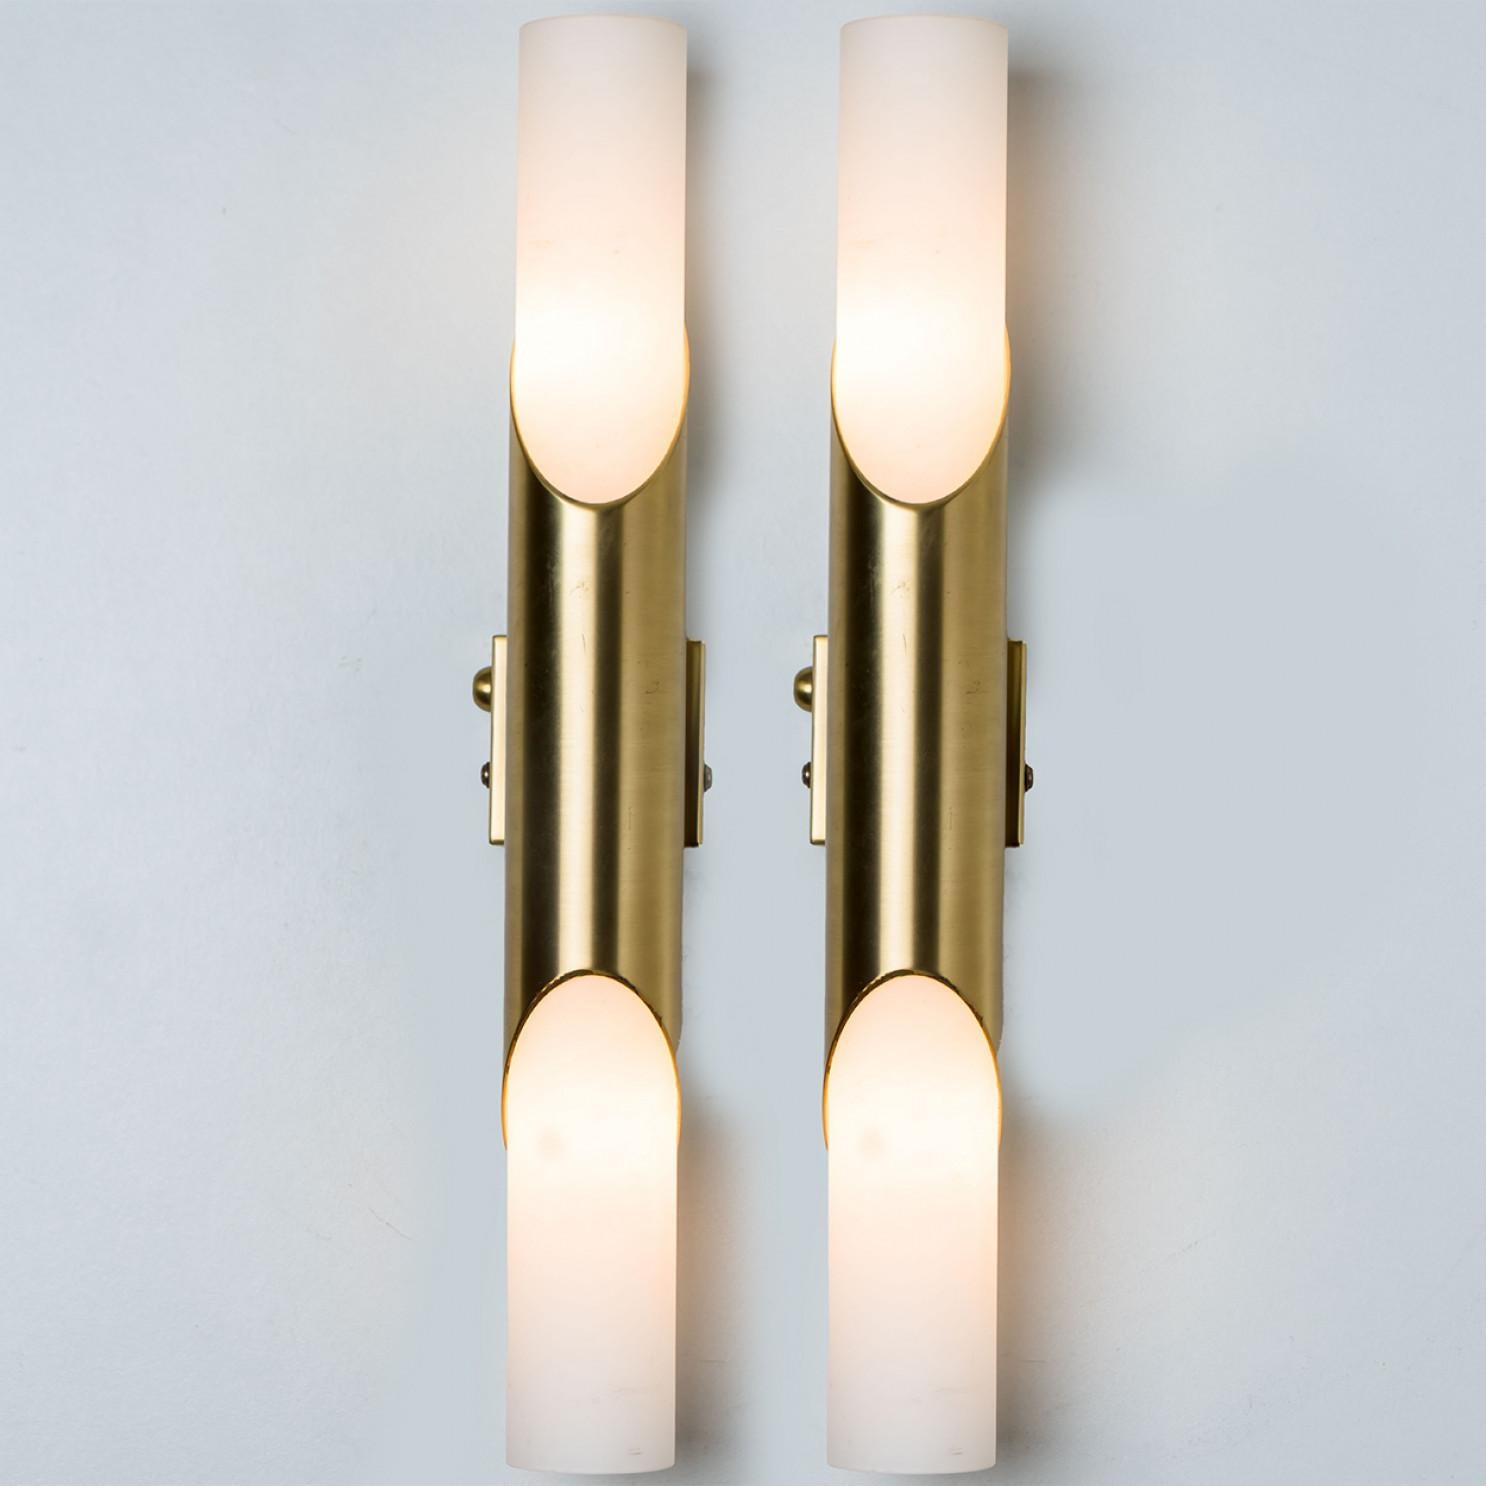 A Pair of Tube Milkglass Brass Wall Sconces, Germany, 1970s For Sale 7